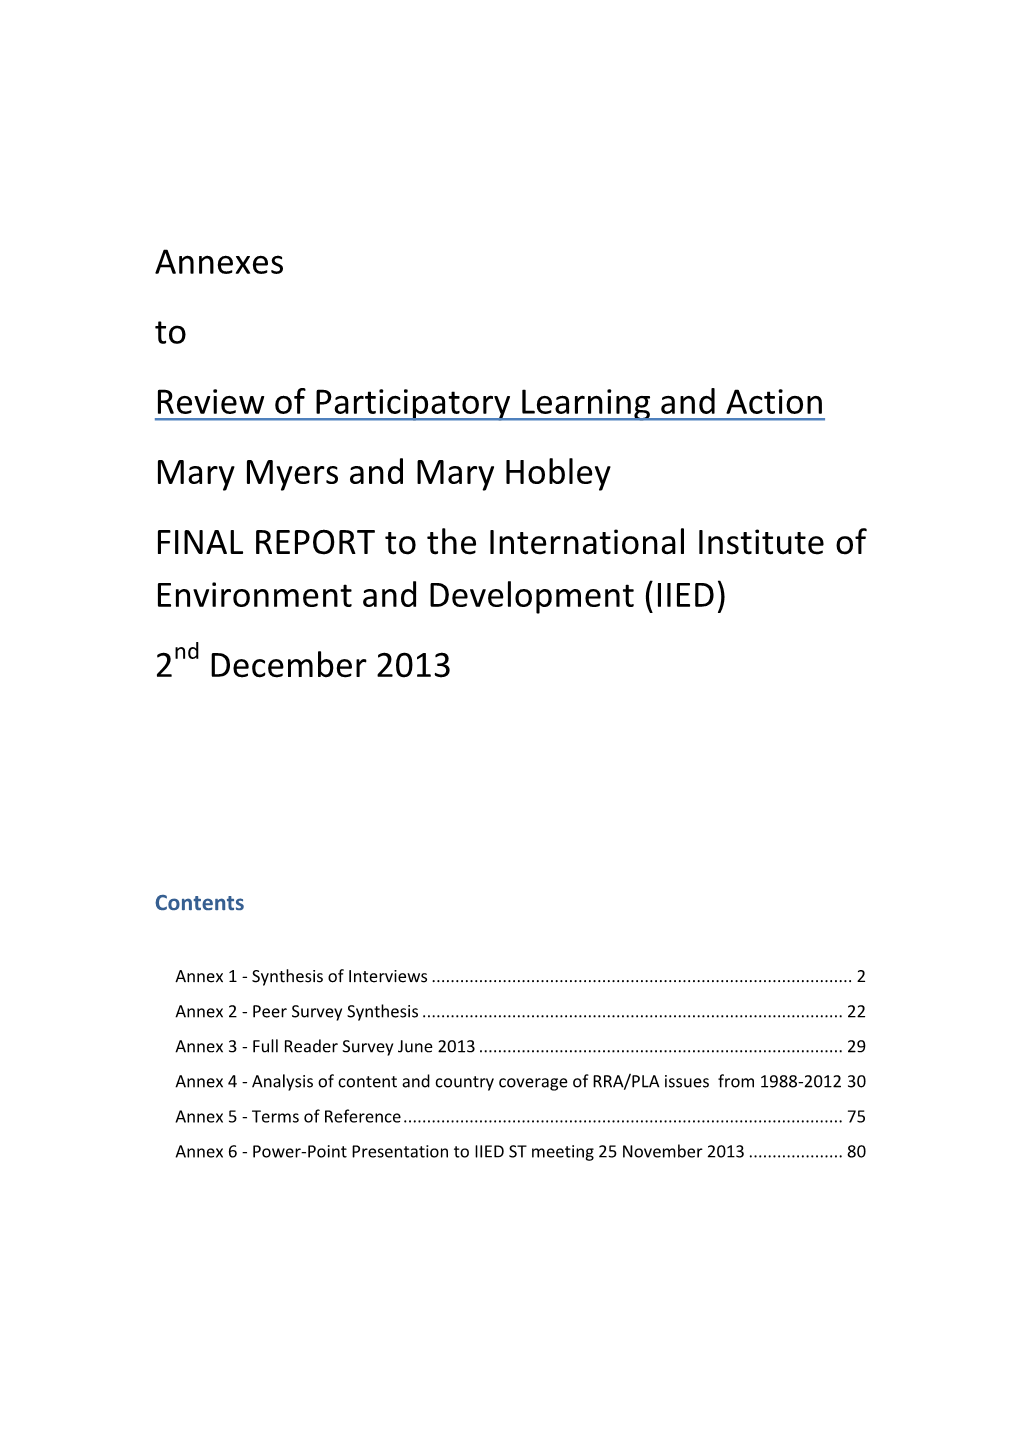 Annexes to Review of Participatory Learning and Action Mary Myers